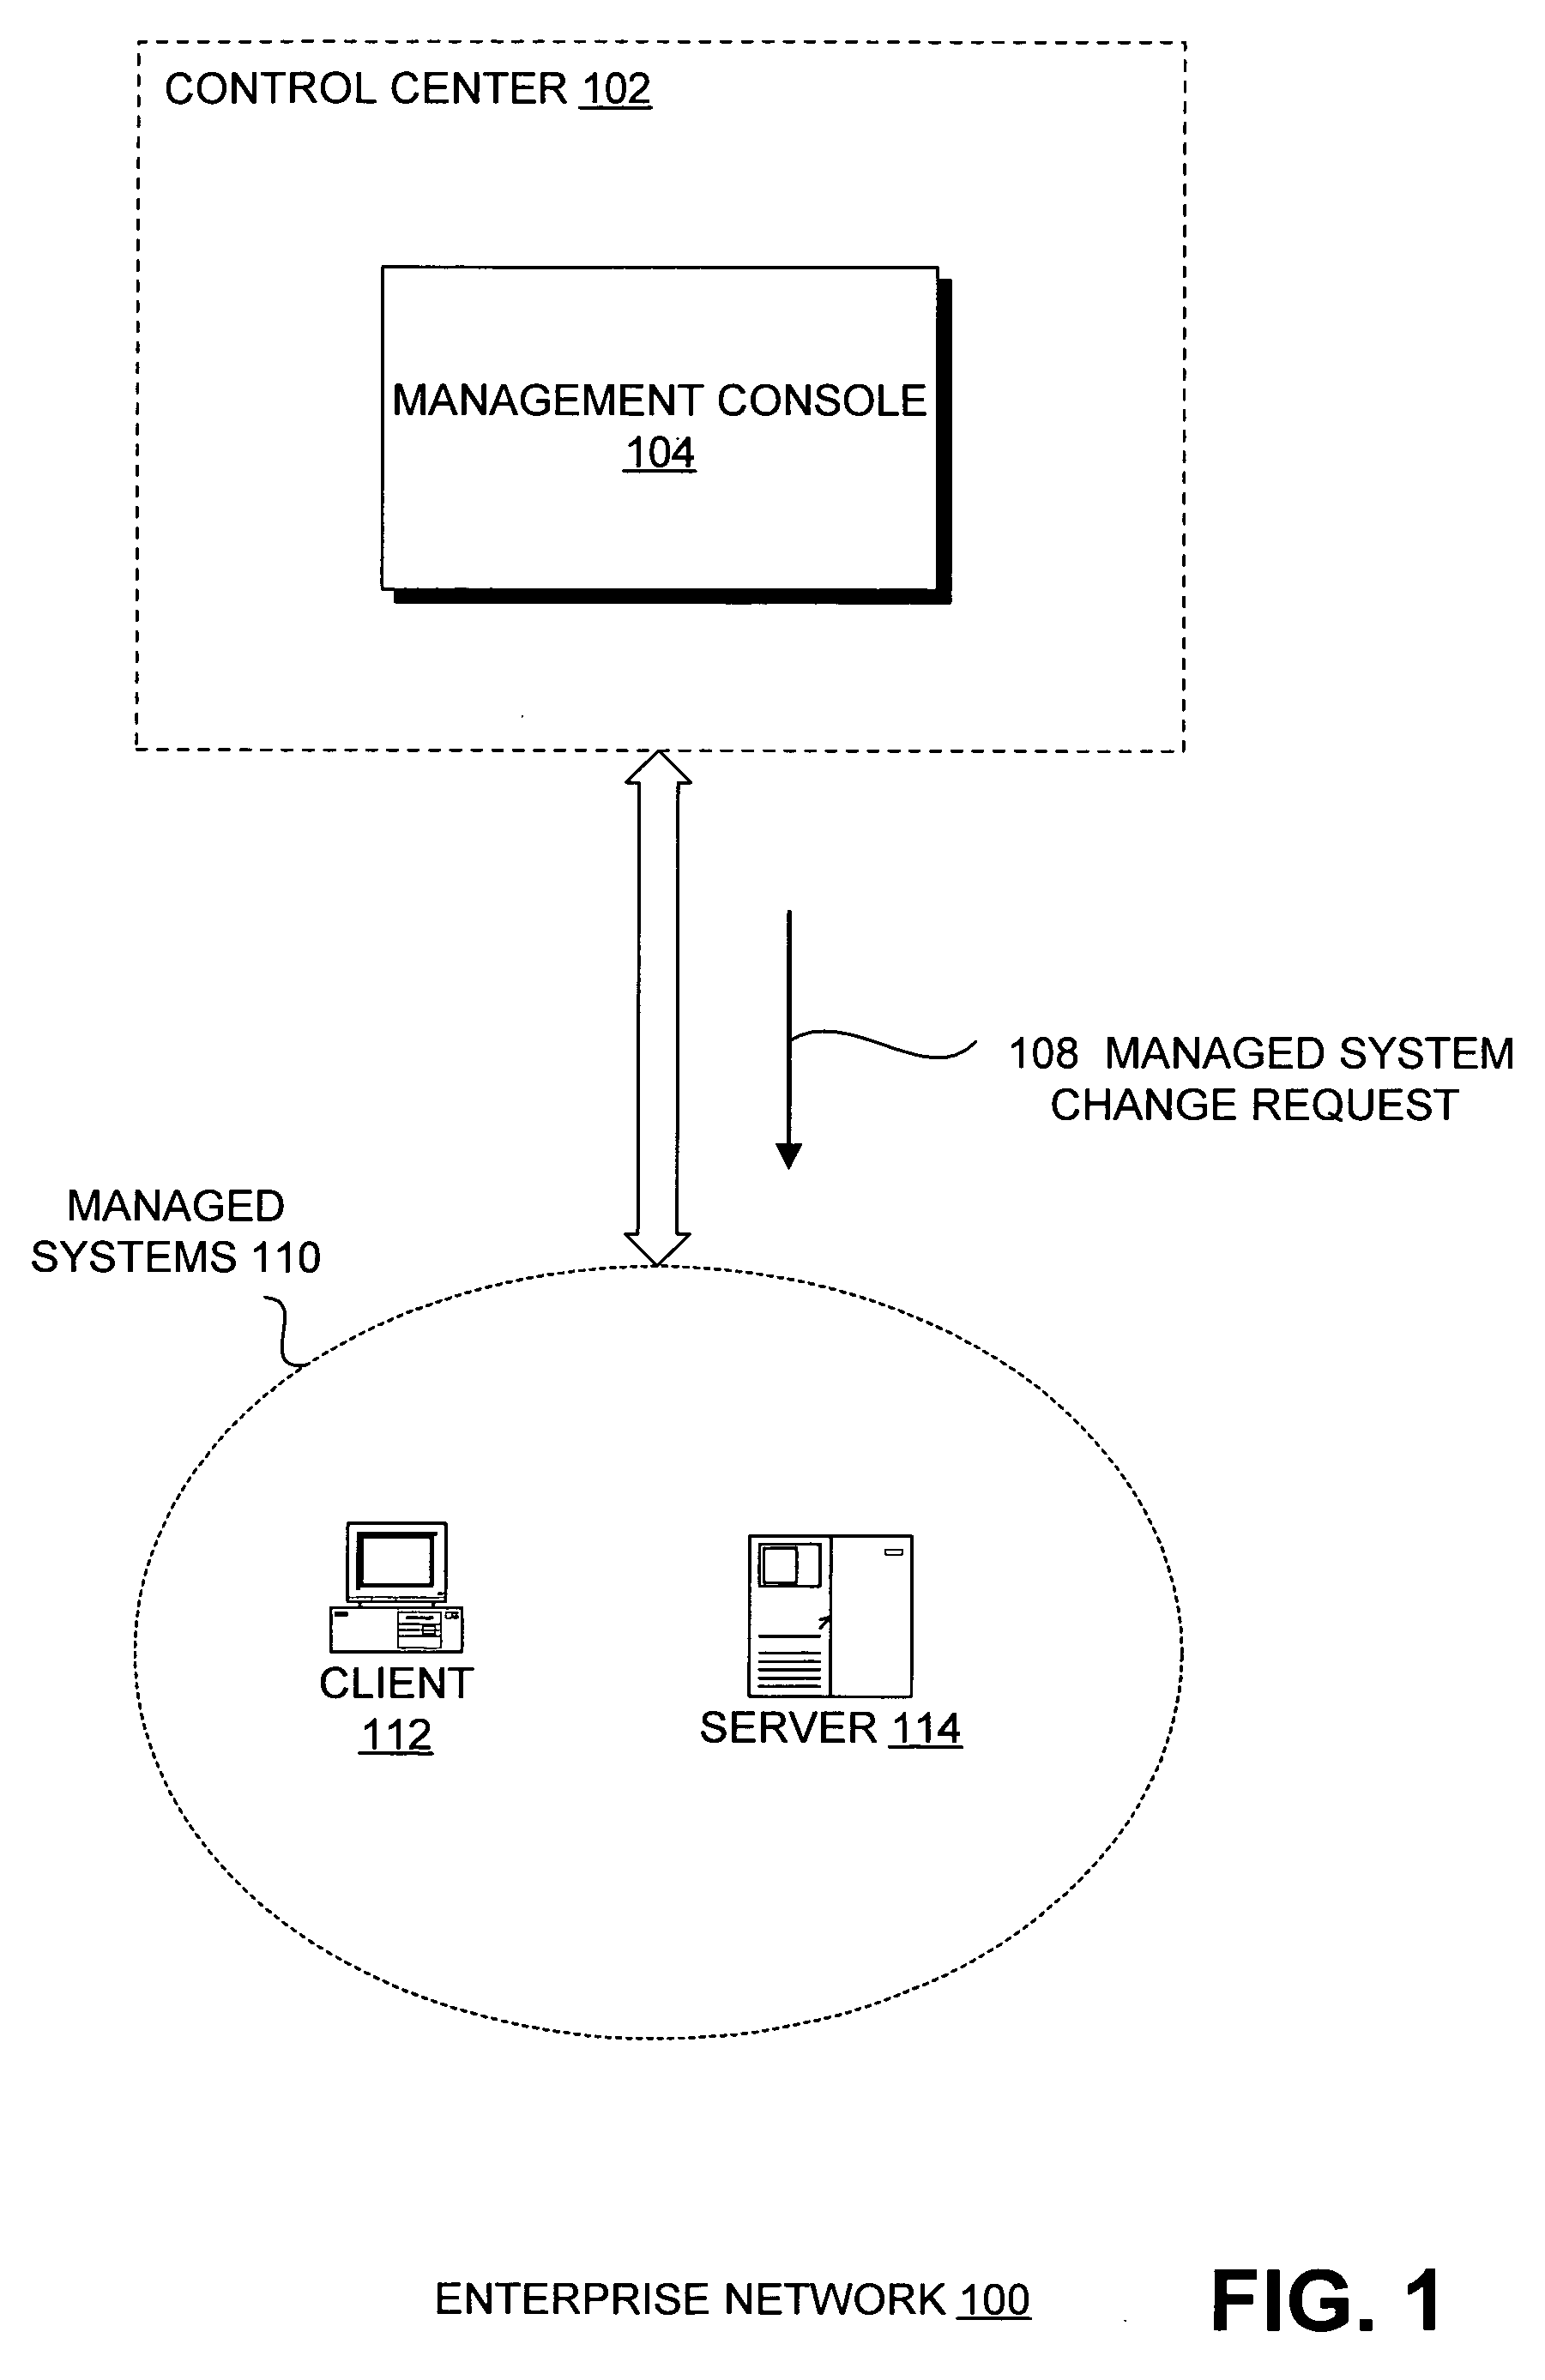 Remote management of a computer system